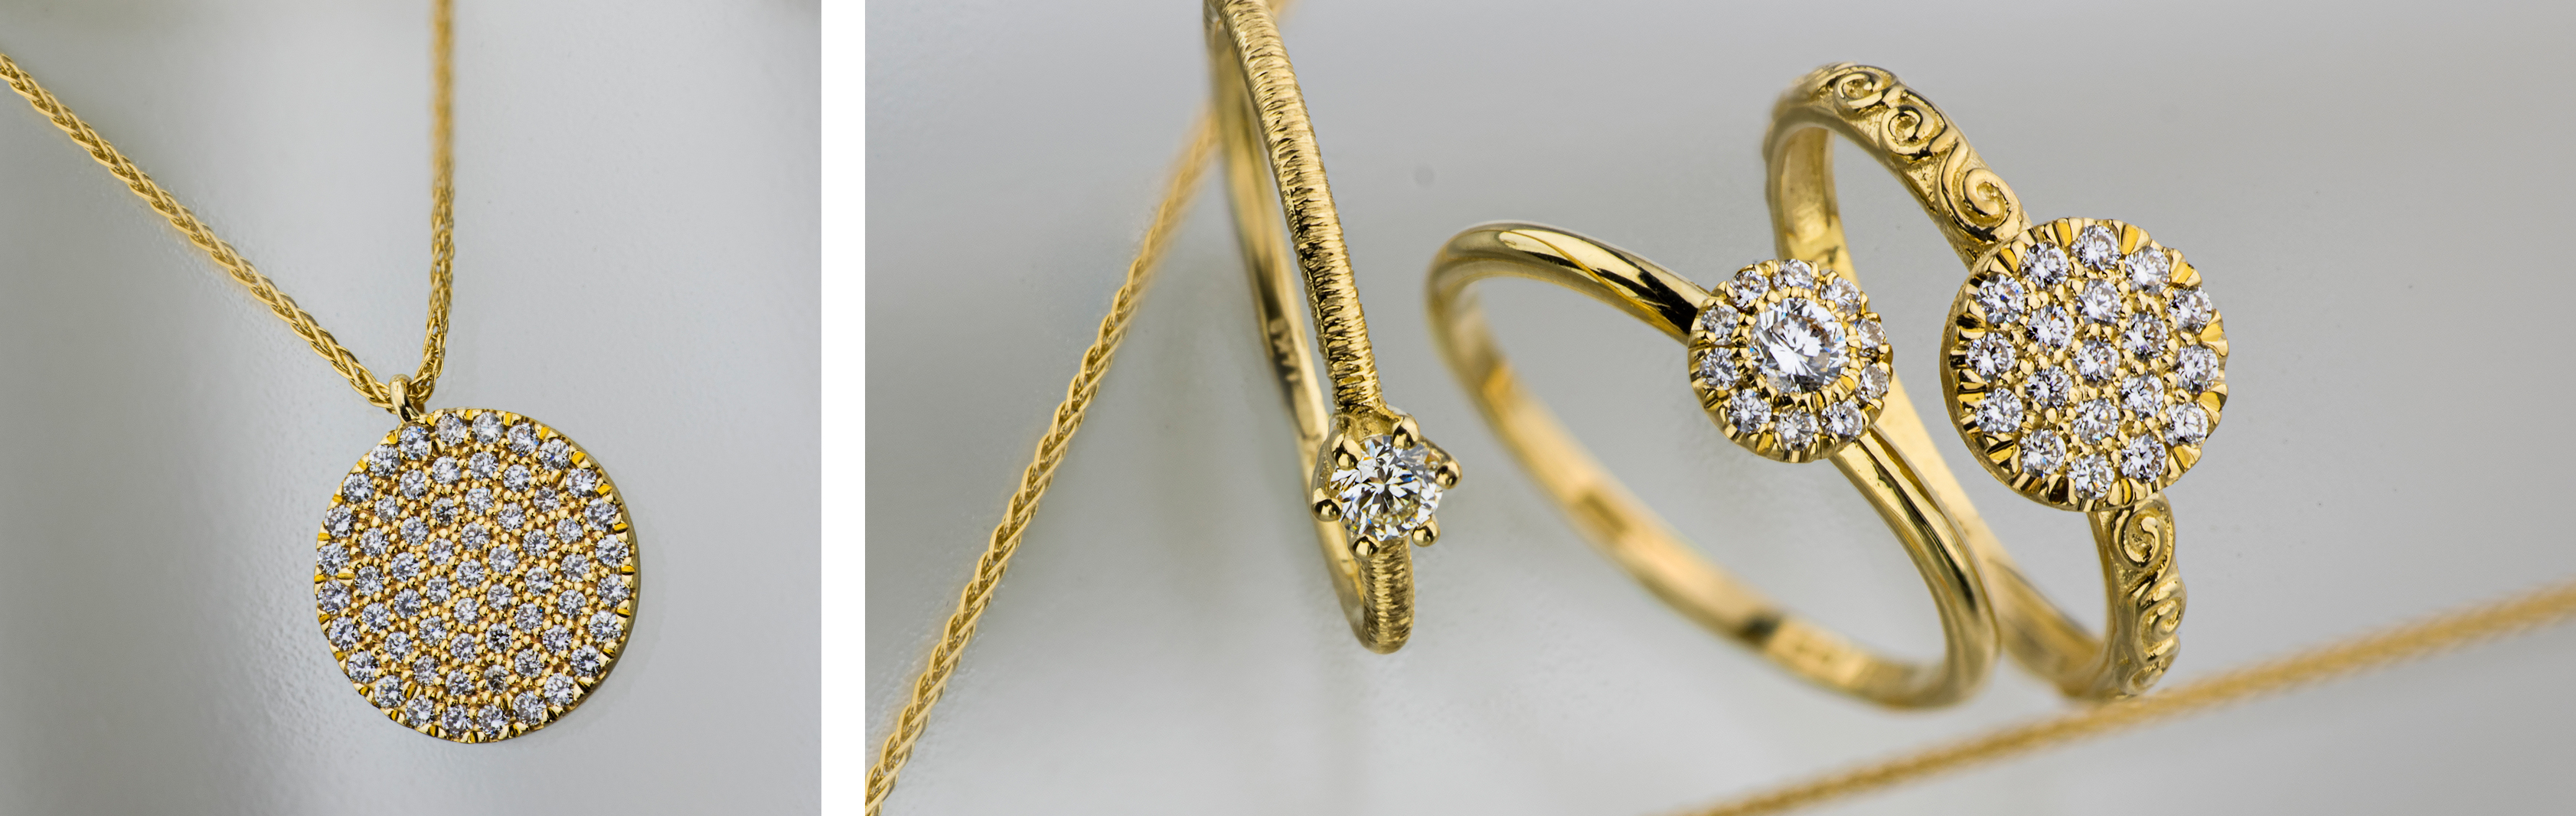 Golden Sphere Collection | 14K Gold and Diamond Jewelry